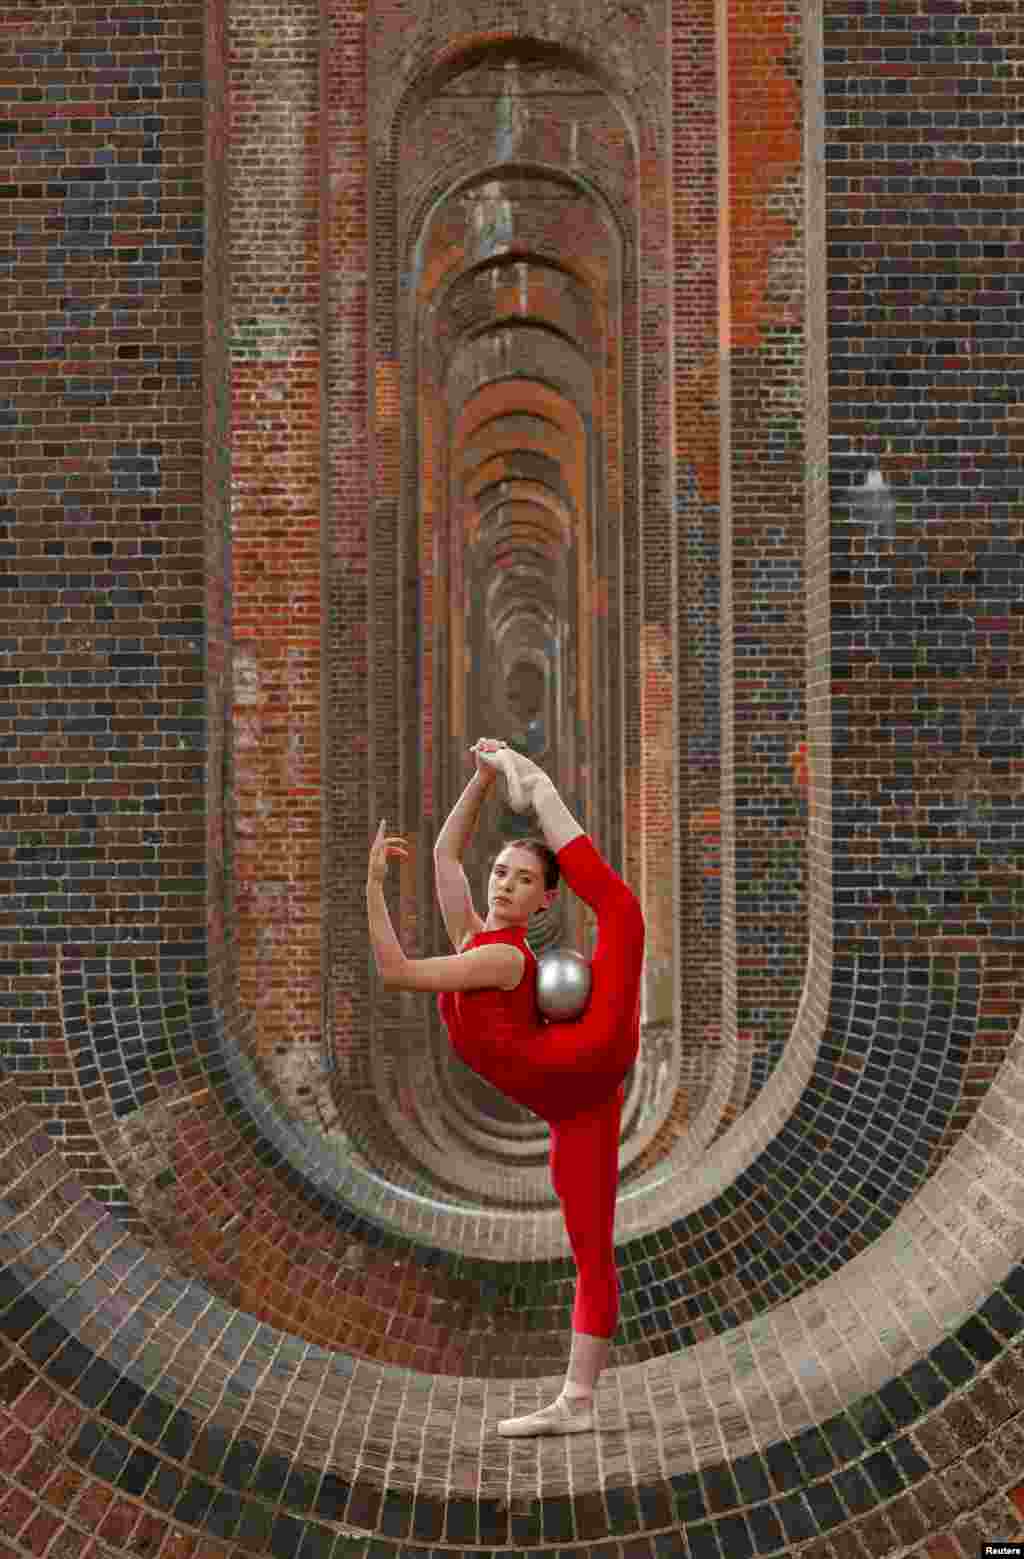 Former British Rhythmic Gymnastic star and dancer Hannah Martin is seen during a training session at Ouse Valley Viaduct in Sussex, Britain.